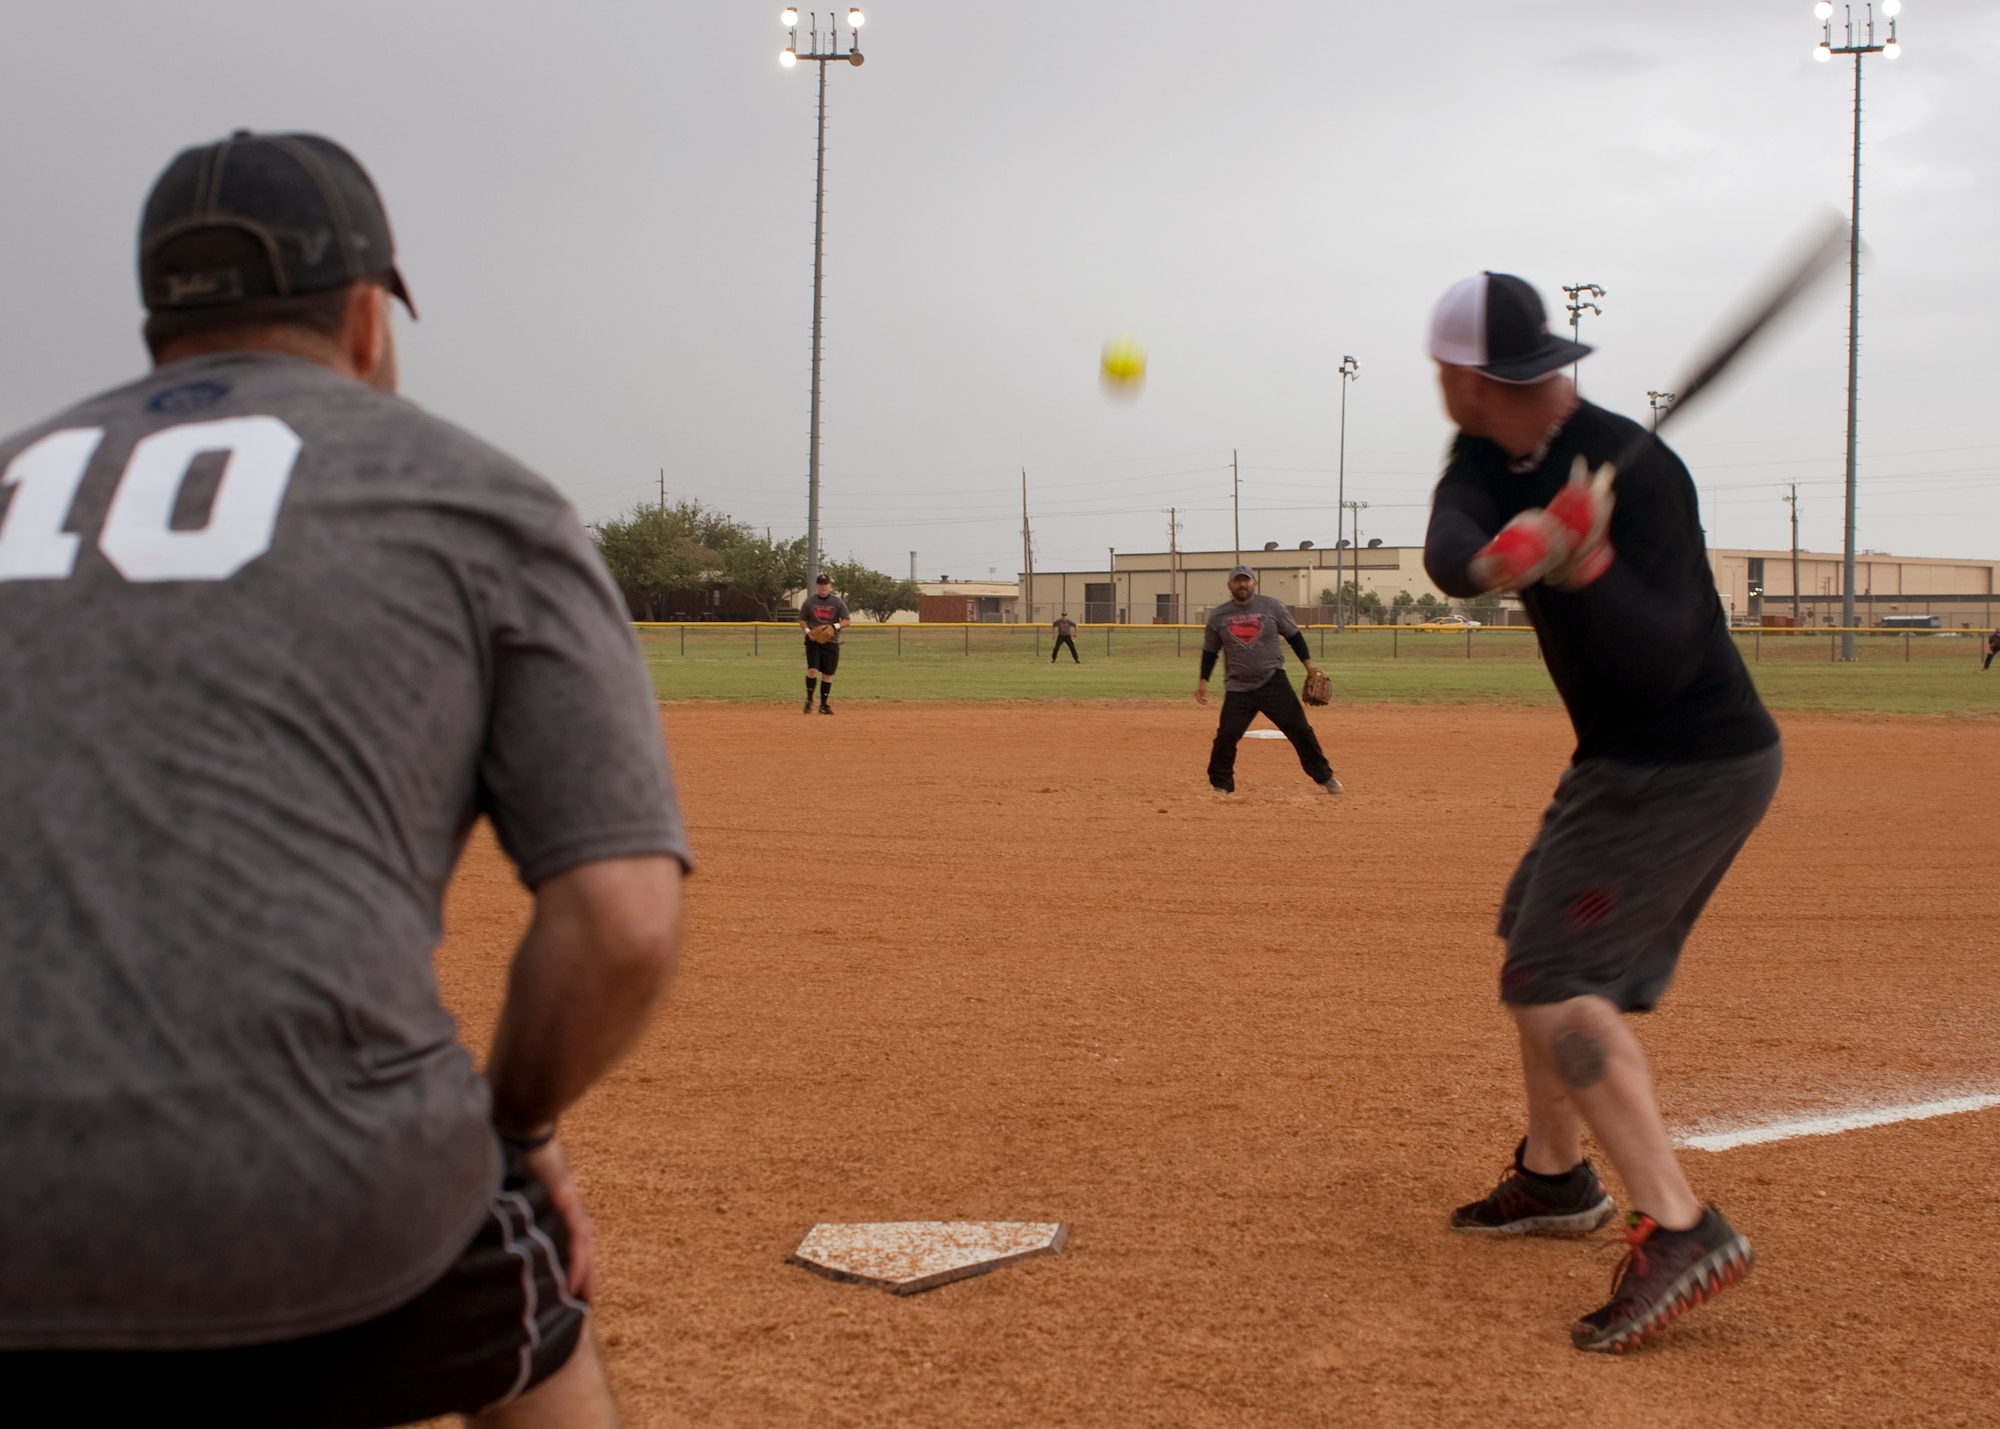 U.S. Air Force Staff Sgt. Will Davis, 7th Security Forces Squadron, swings at a pitch May 13, 2014, at Dyess Air Force Base, Texas. The Abilene Police Department played against the 7th SFS in honor of all fallen law enforcement members and fellow Airmen who have given their lives in the line of duty. The 7th SFS and APD participated in several events in honor of National Police Week. (U.S. Air Force photo by Senior Airman Peter Thompson/Released)